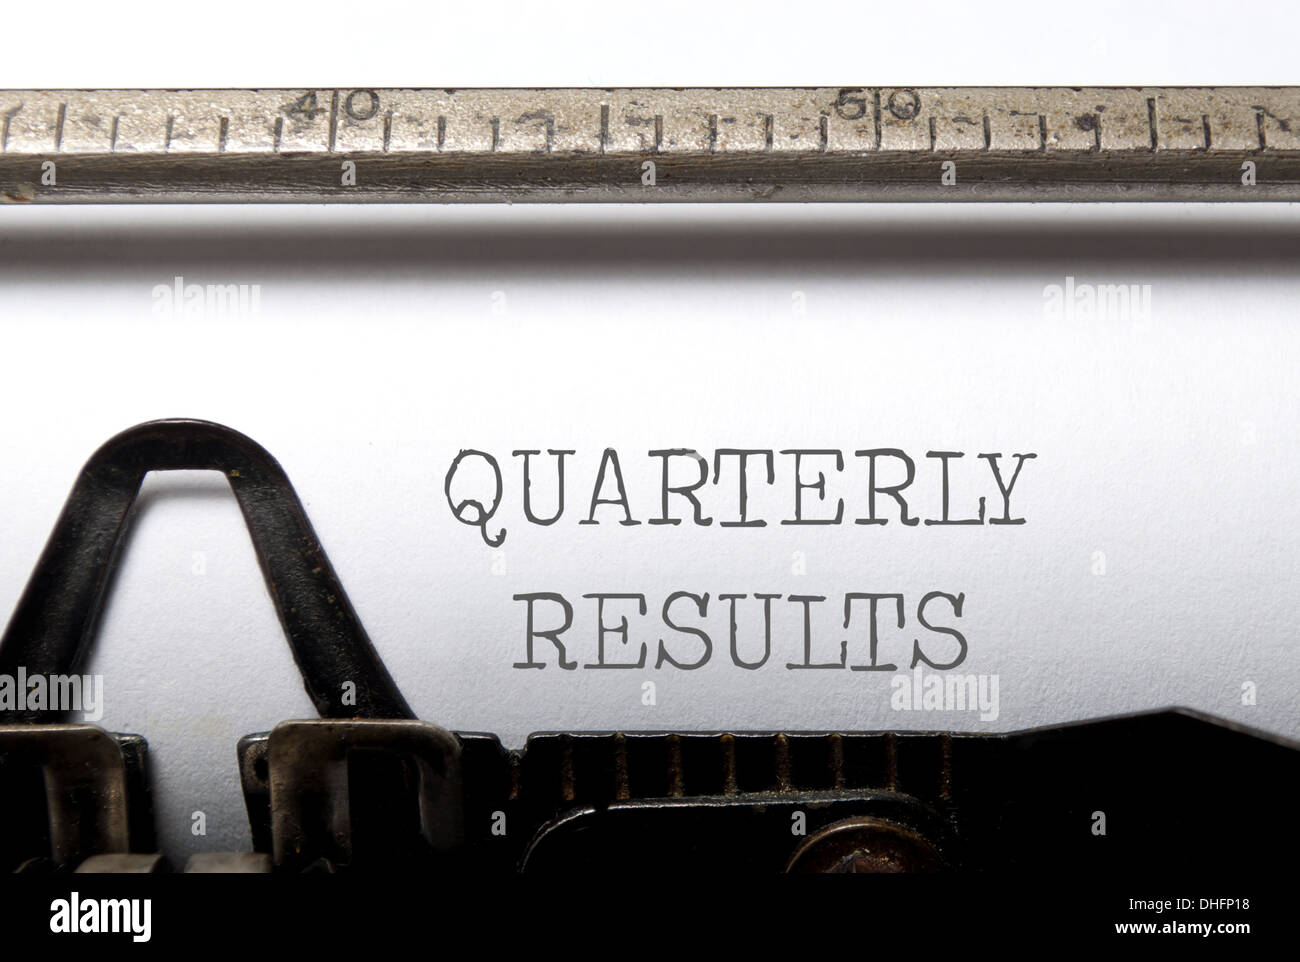 Quarterly results Stock Photo